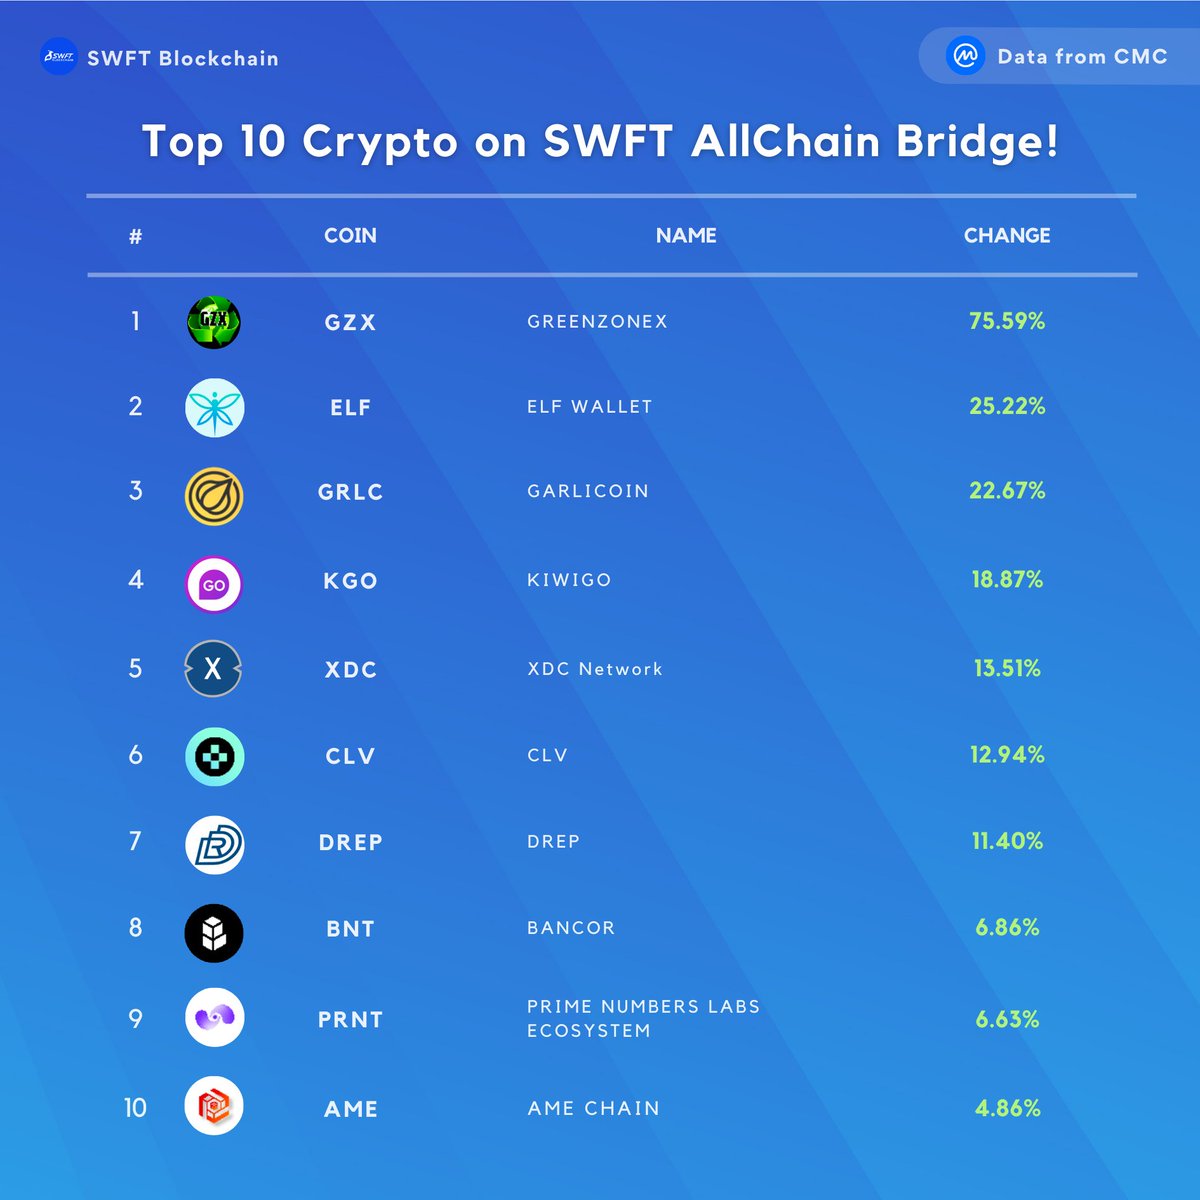 🚨 Daily Market Update 🚨 🚀📈 Here's the top 10 #crypto on SWFT AllChain Bridge from the past 24 hours, based on @CoinMarketCap! 🎉 🔹 $GZX 75.59% 🔹 $ELF 25.22% 🔹 $GRLC 22.67% 🔹 $KGO 18.87% 🔹 $XDC 13.51% 🔹 $CLV 12.94% 🔹 $DREP 11.40% 🔹 $ZBC 6.86% 🔹 $GRLC 6.63% 🔹 $ELF…